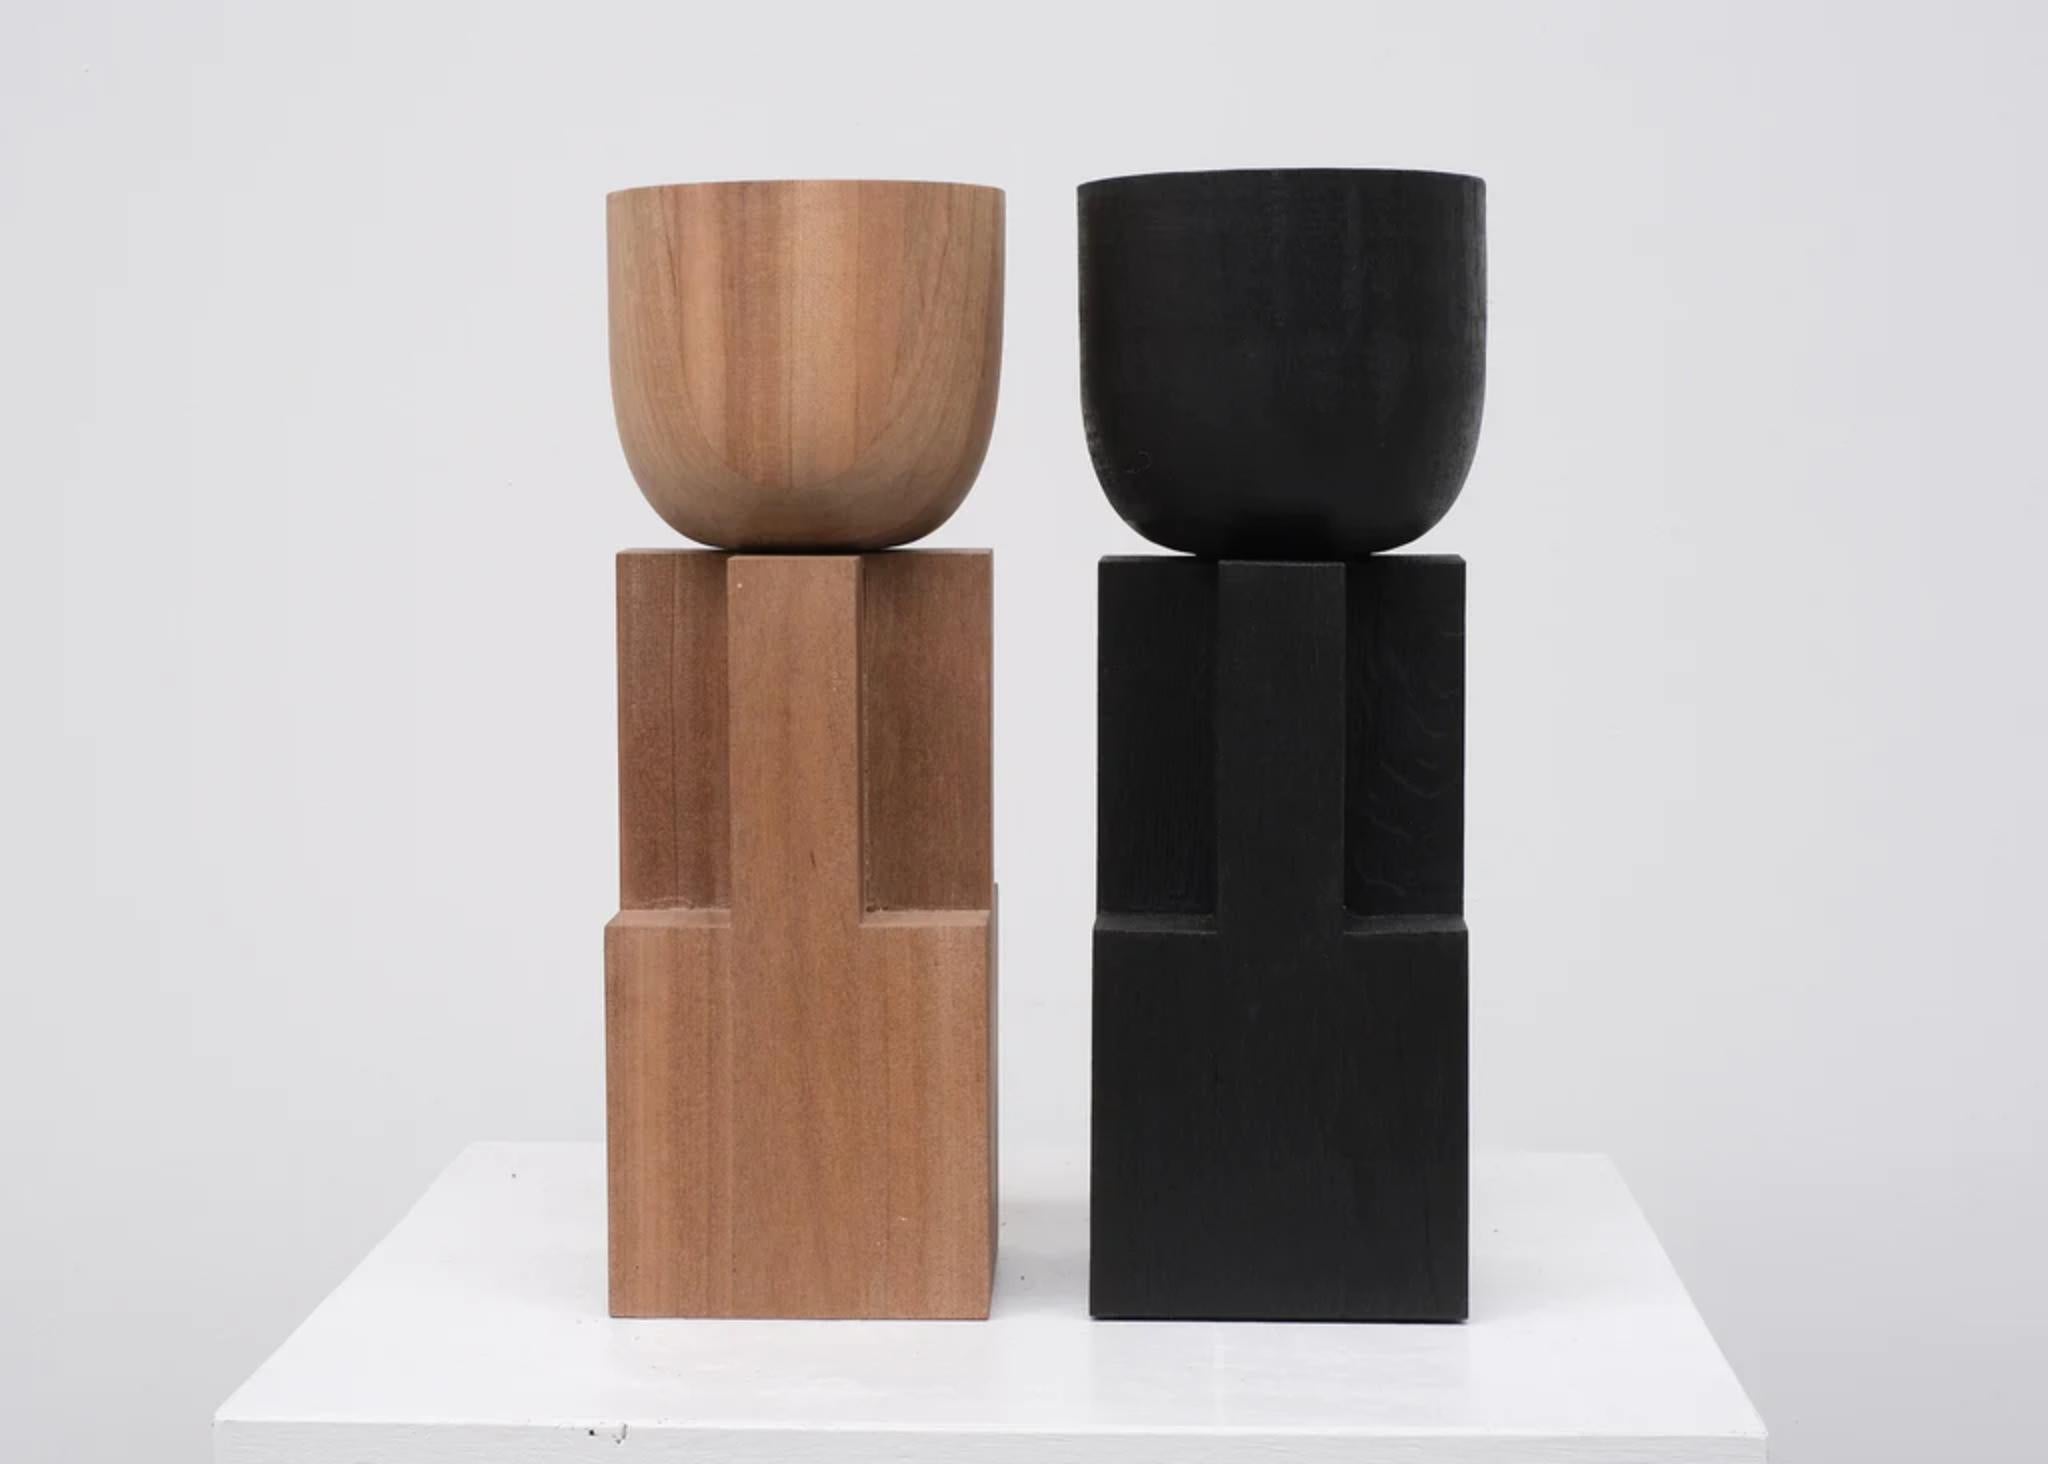 African walnut goblet vase by Arno Declercq
Materials: Natural African walnut.
Dimensions: W 14 x D 14 x H 40 cm.


Arno Declercq
Belgian designer and art dealer who makes bespoke objects with passion for design, atmosphere, history and Craft. Arno